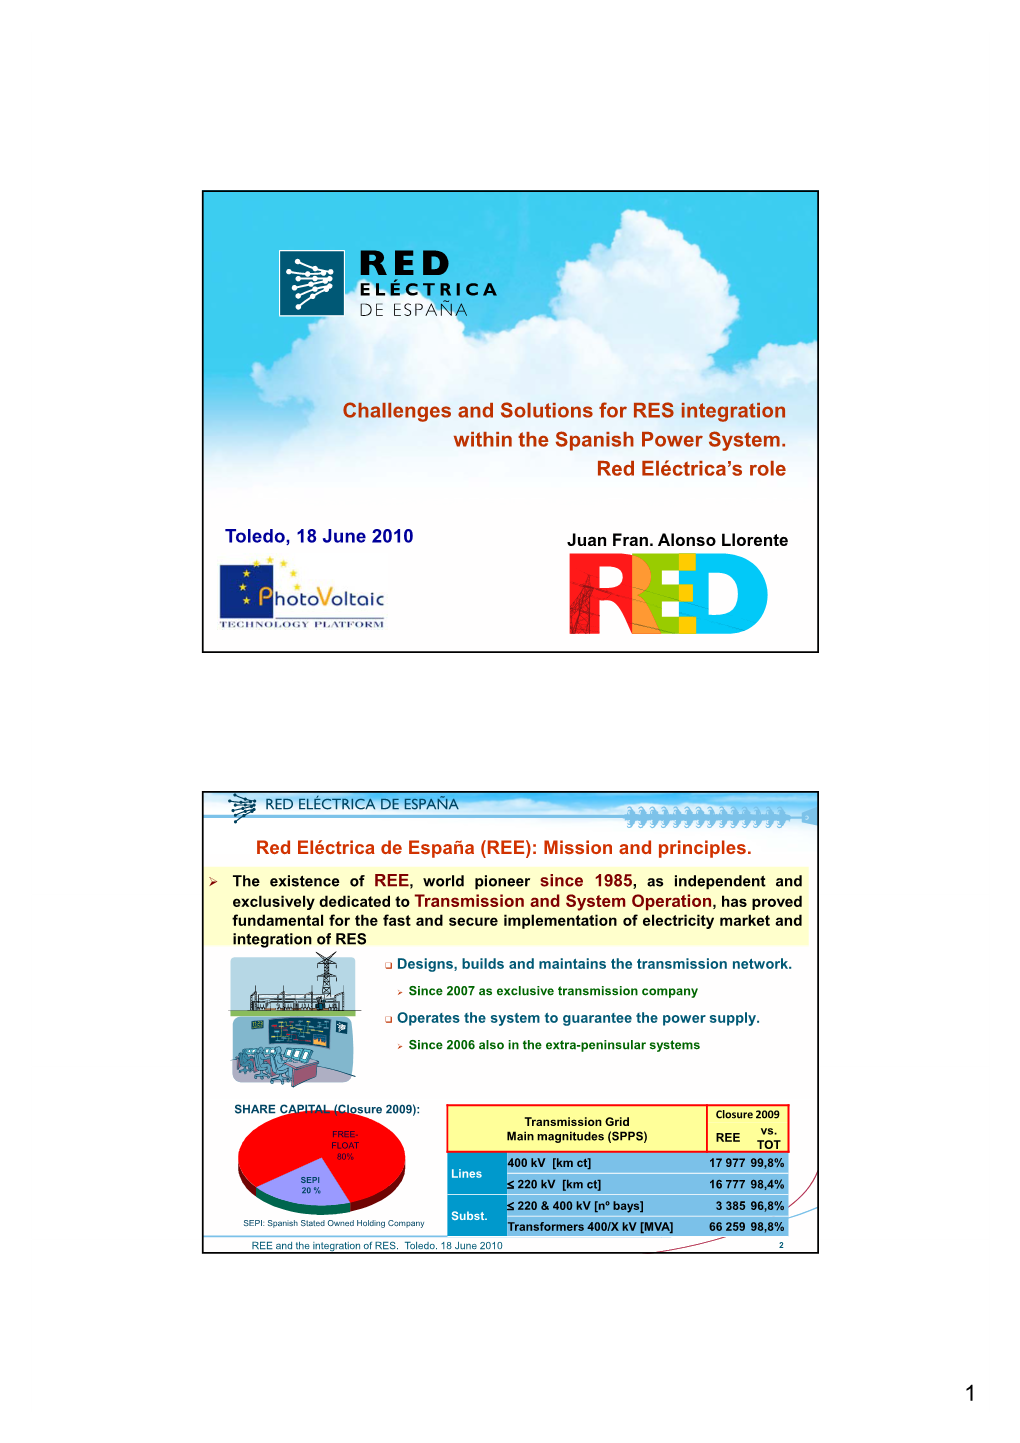 Challenges and Solutions for RES Integration Within the Spanish Power System